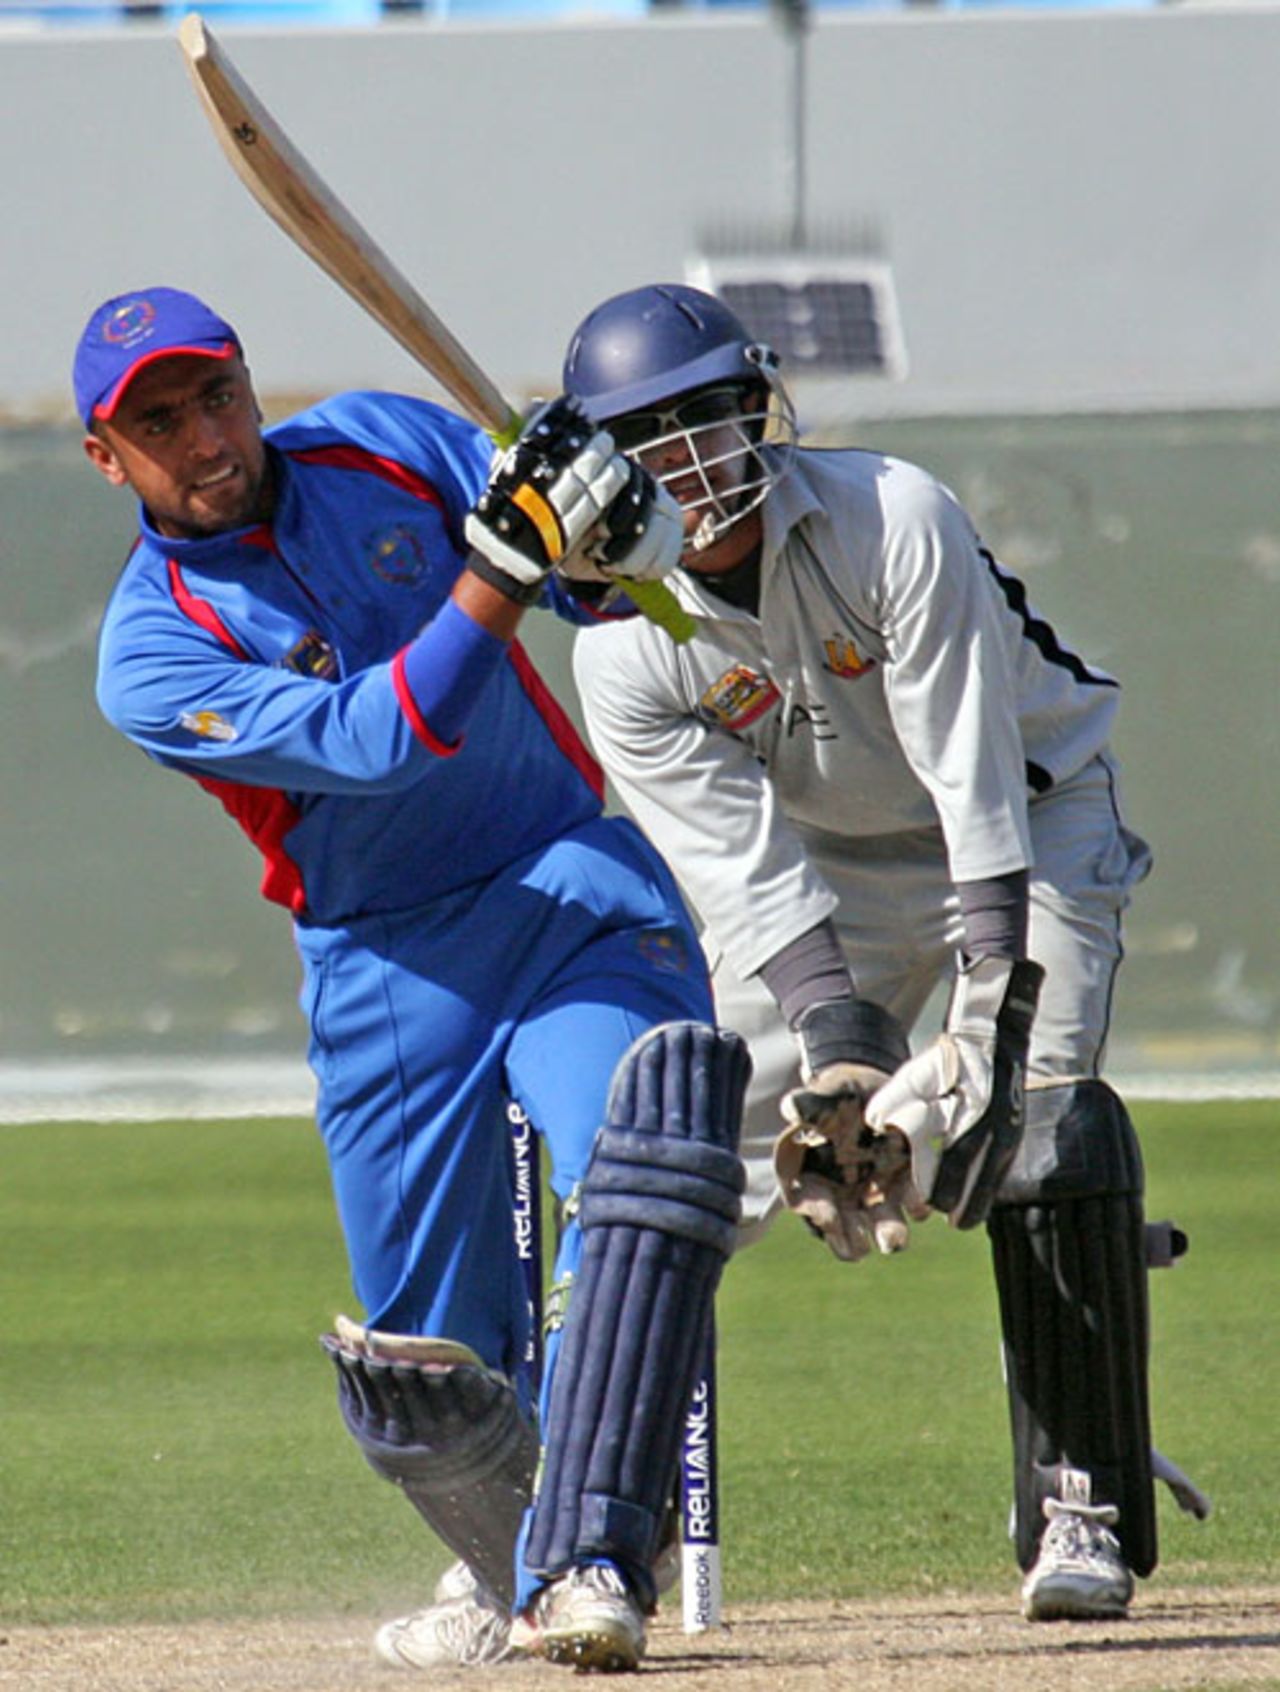 Noor Ali's controlled and unbeaten 38 guided Afghanistan into the World Twenty20 tournament, United Arab Emirates v Afghanistan, ICC World Twenty20 Qualifier, Super Four, Dubai, February 13, 2010